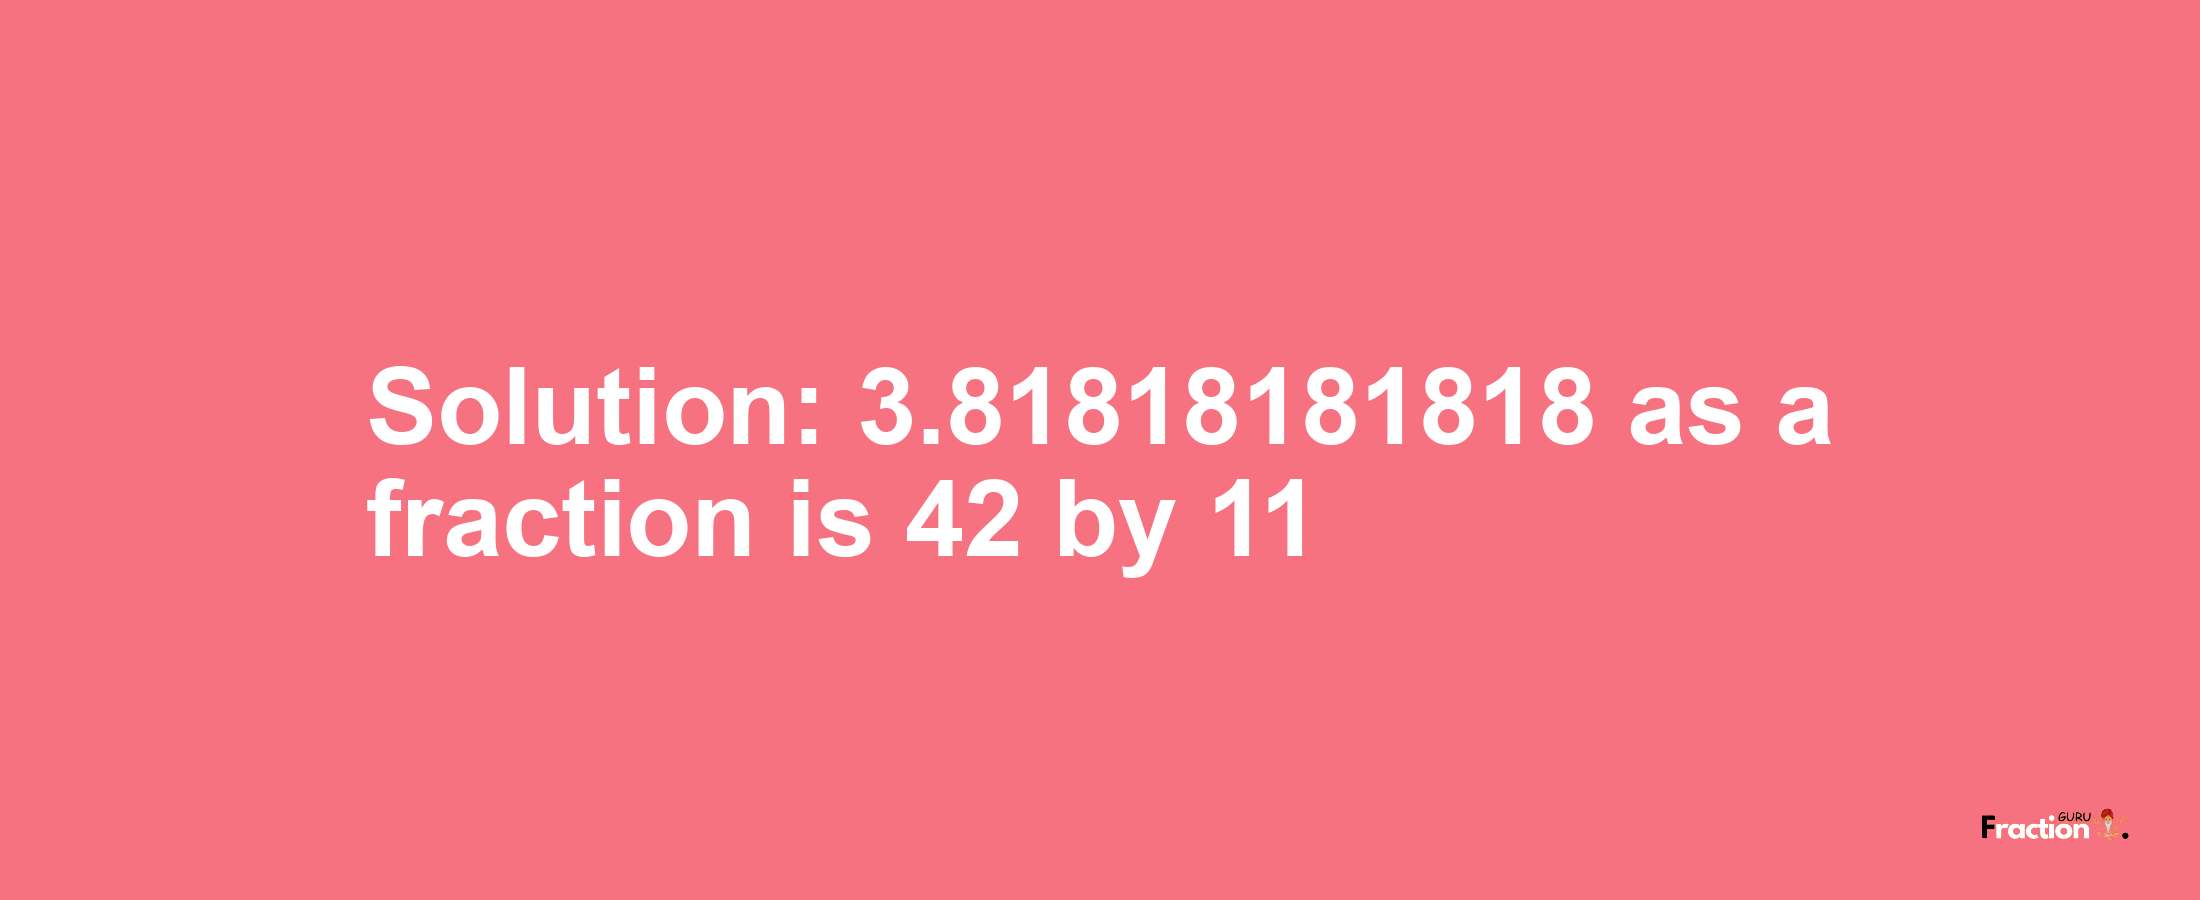 Solution:3.81818181818 as a fraction is 42/11